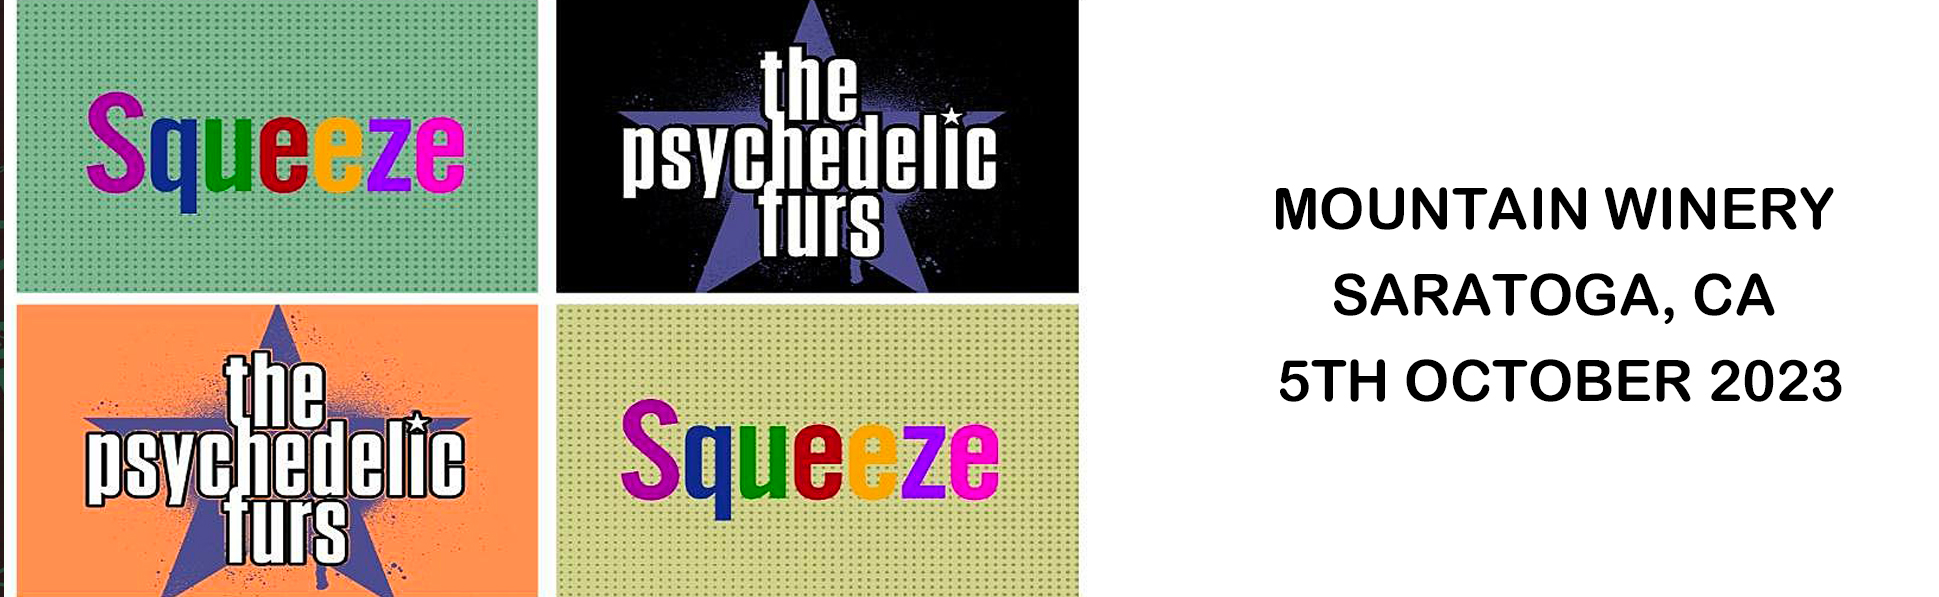 The Psychedelic Furs & Squeeze at Mountain Winery